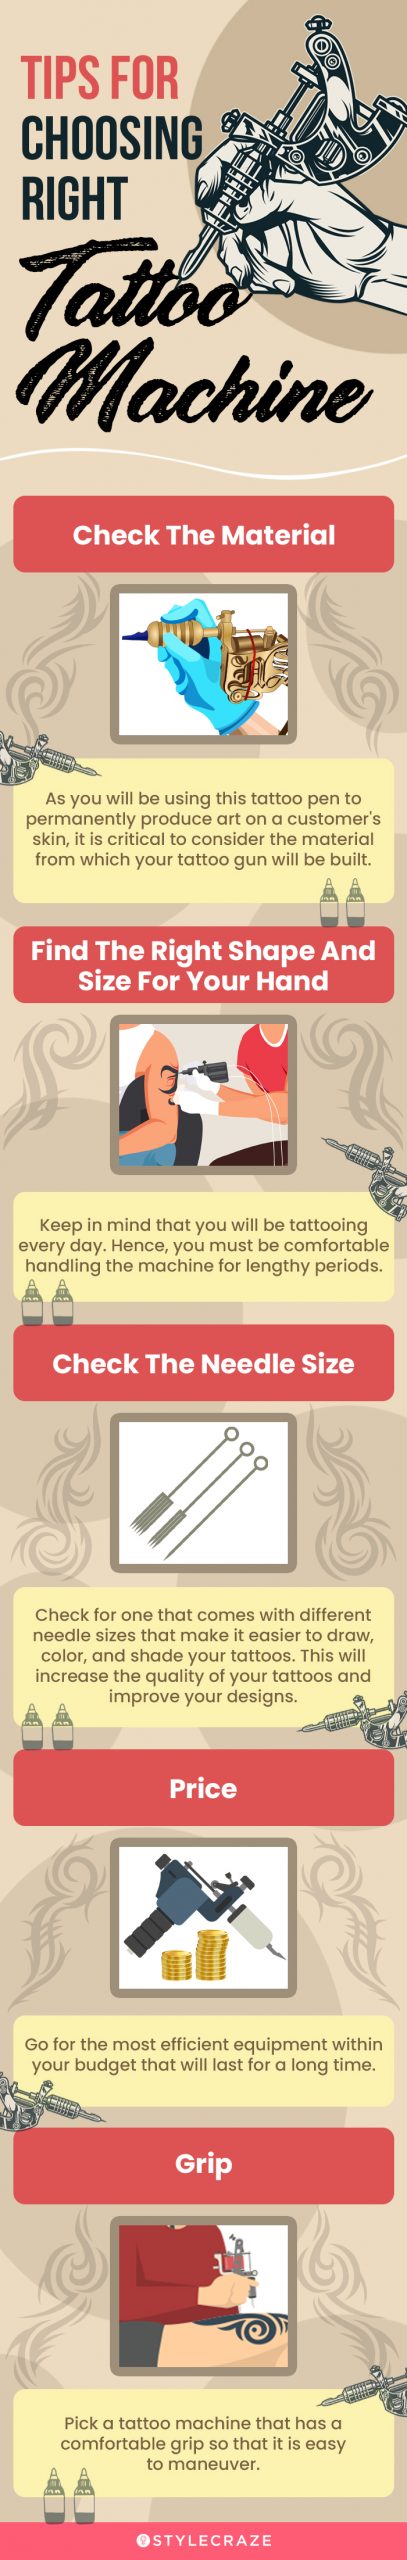 Tips For Choosing The Right Tattoo Machine (infographic)